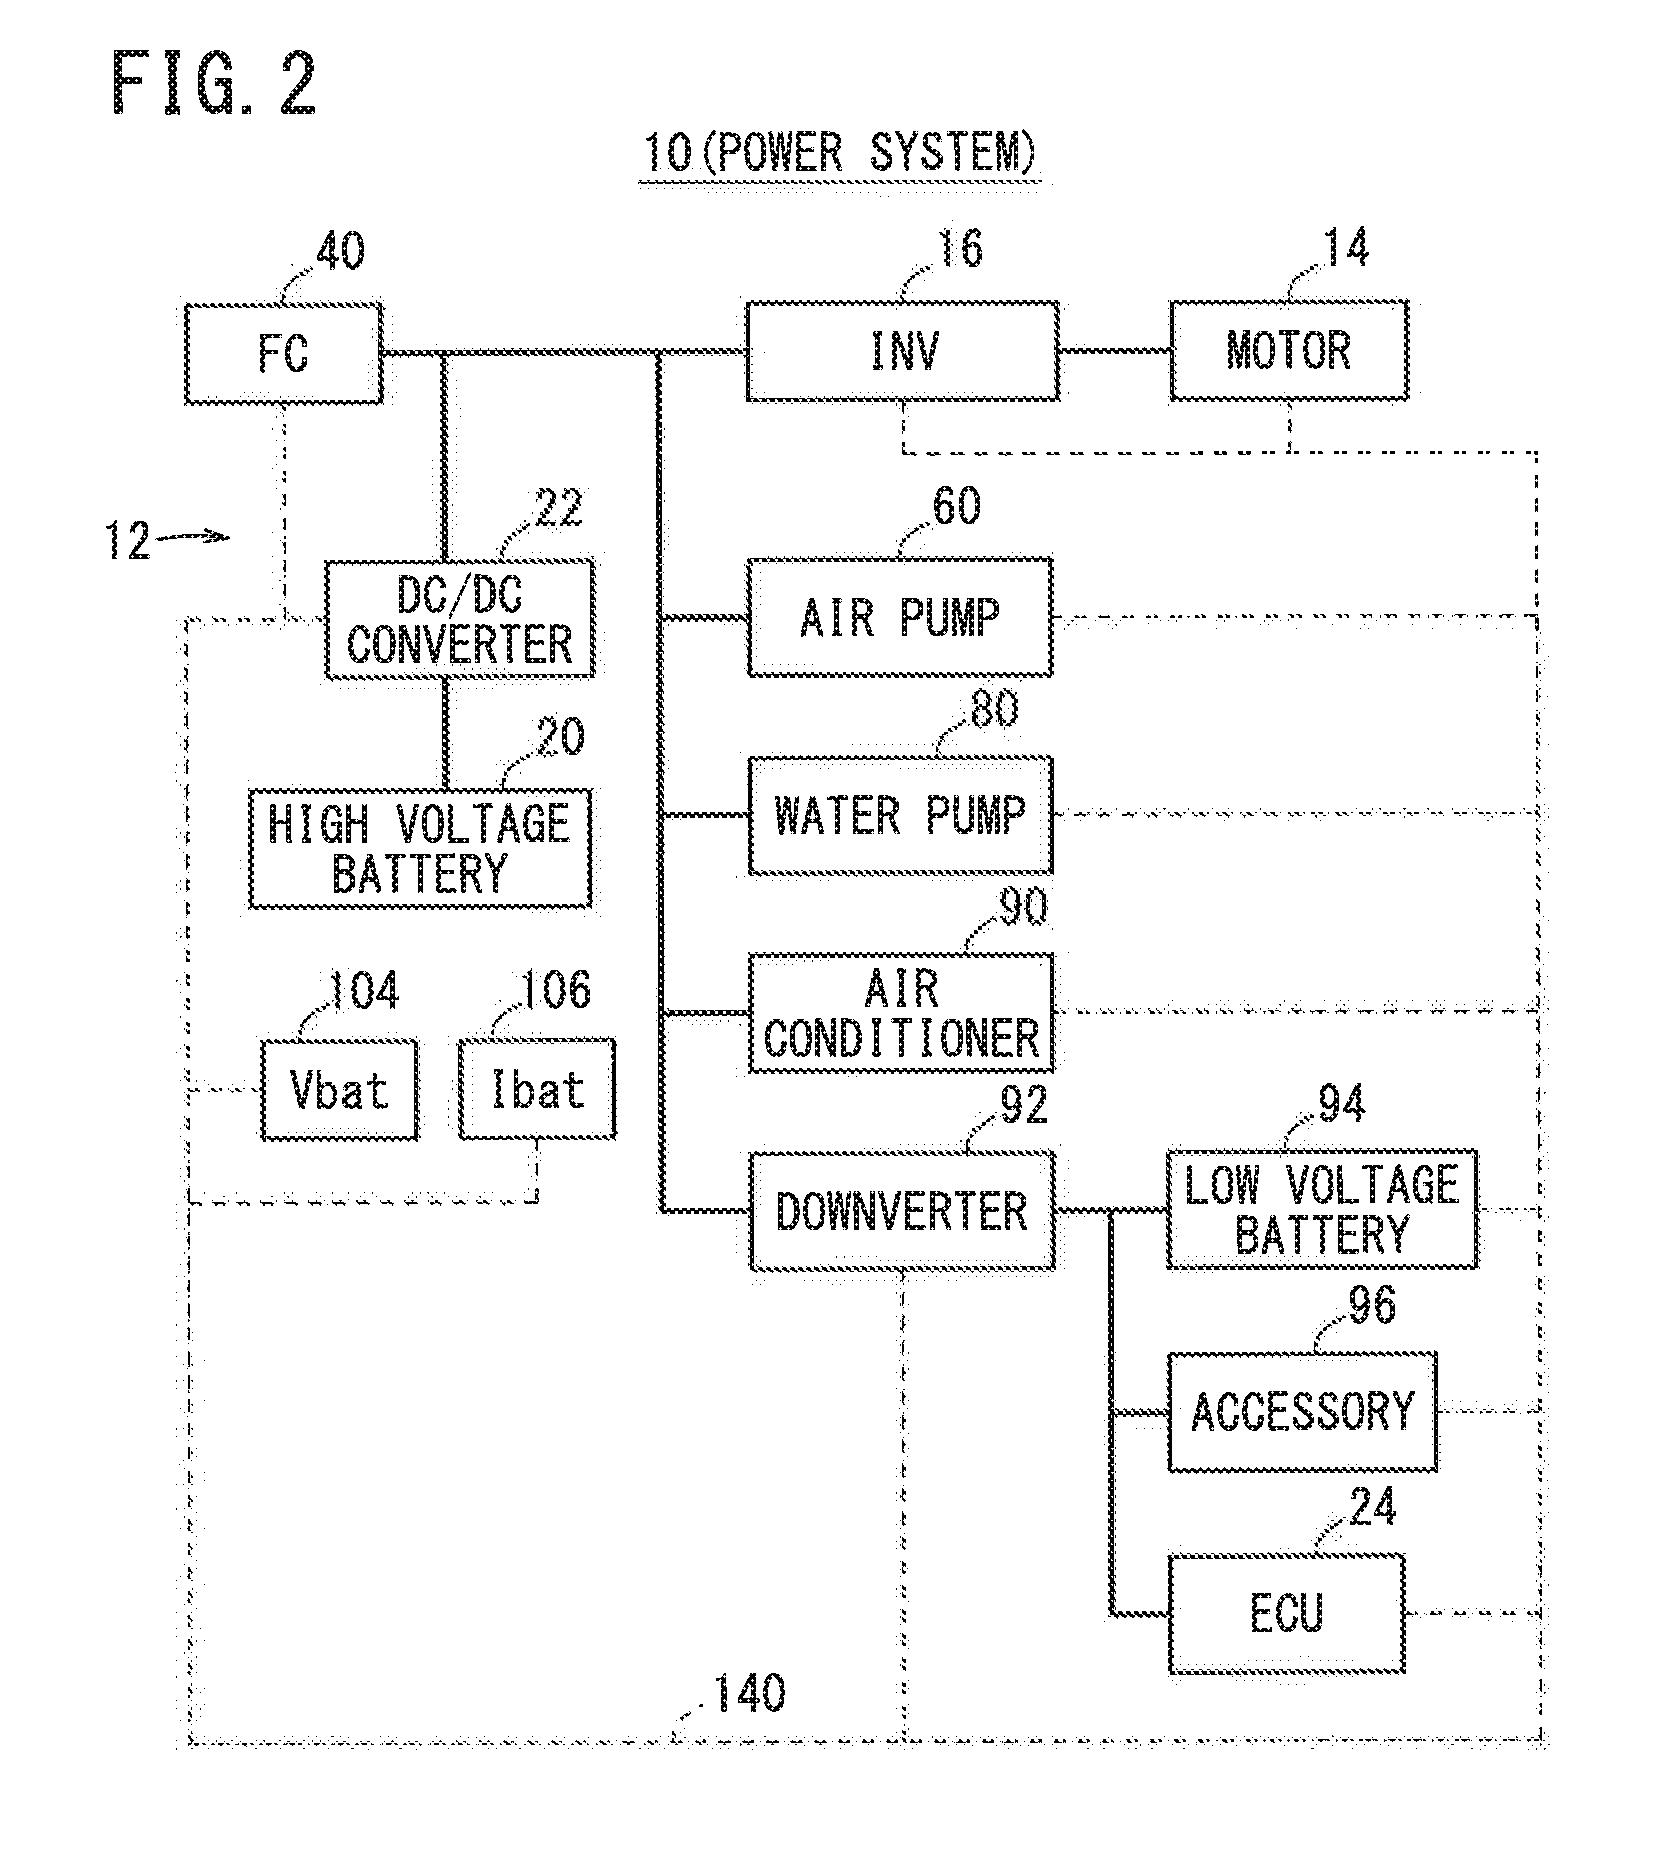 Method of controlling fuel cell system